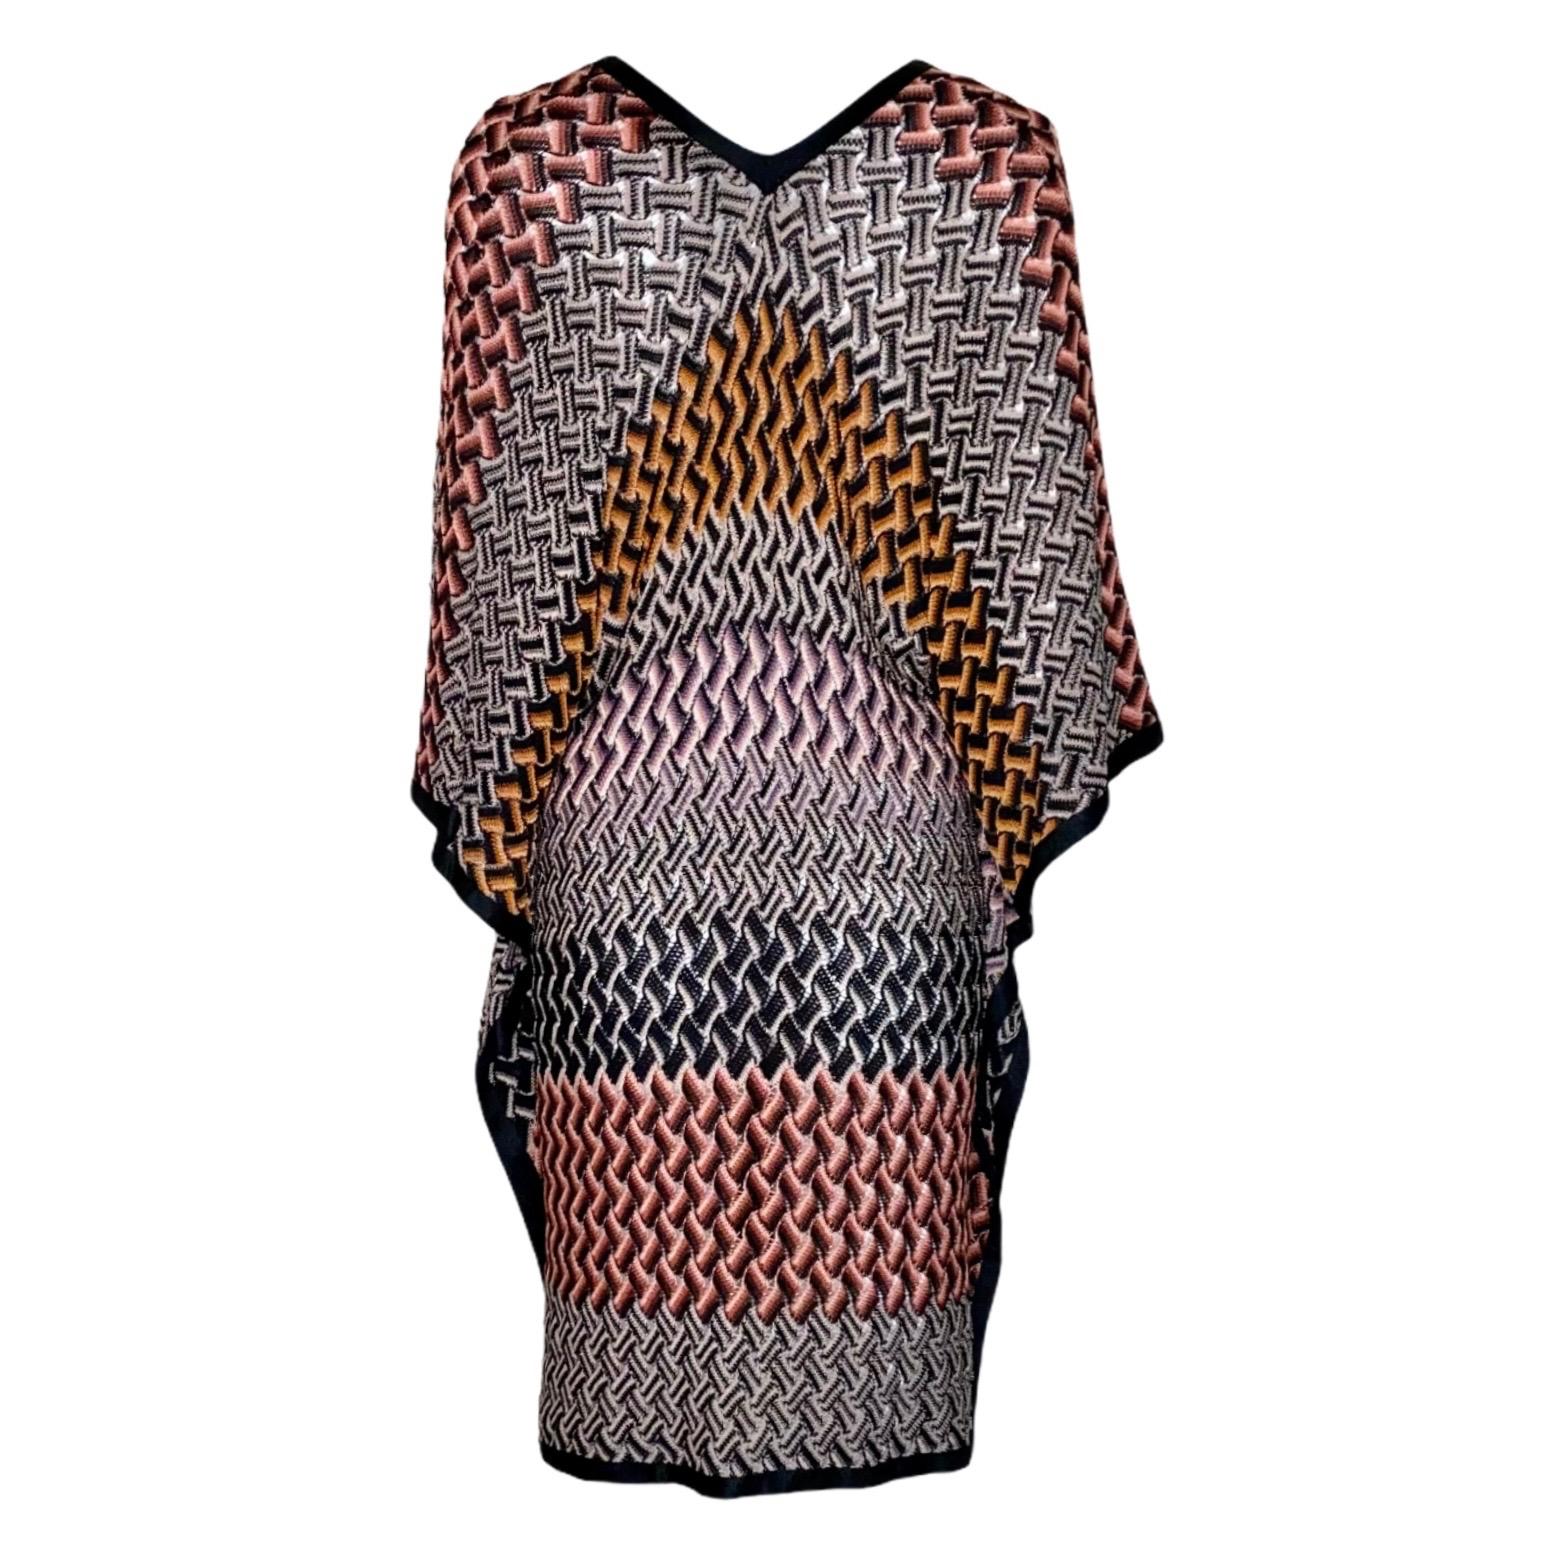 A signature Missoni knit caftan in a cascade of colors is the only piece you'll need this summer season

Multicolored knitted Missoni kaftan in beautiul colors
Plunging V-neckline
Simply slips on
Made in Italy
Dry Clean Only
Size 40
New &